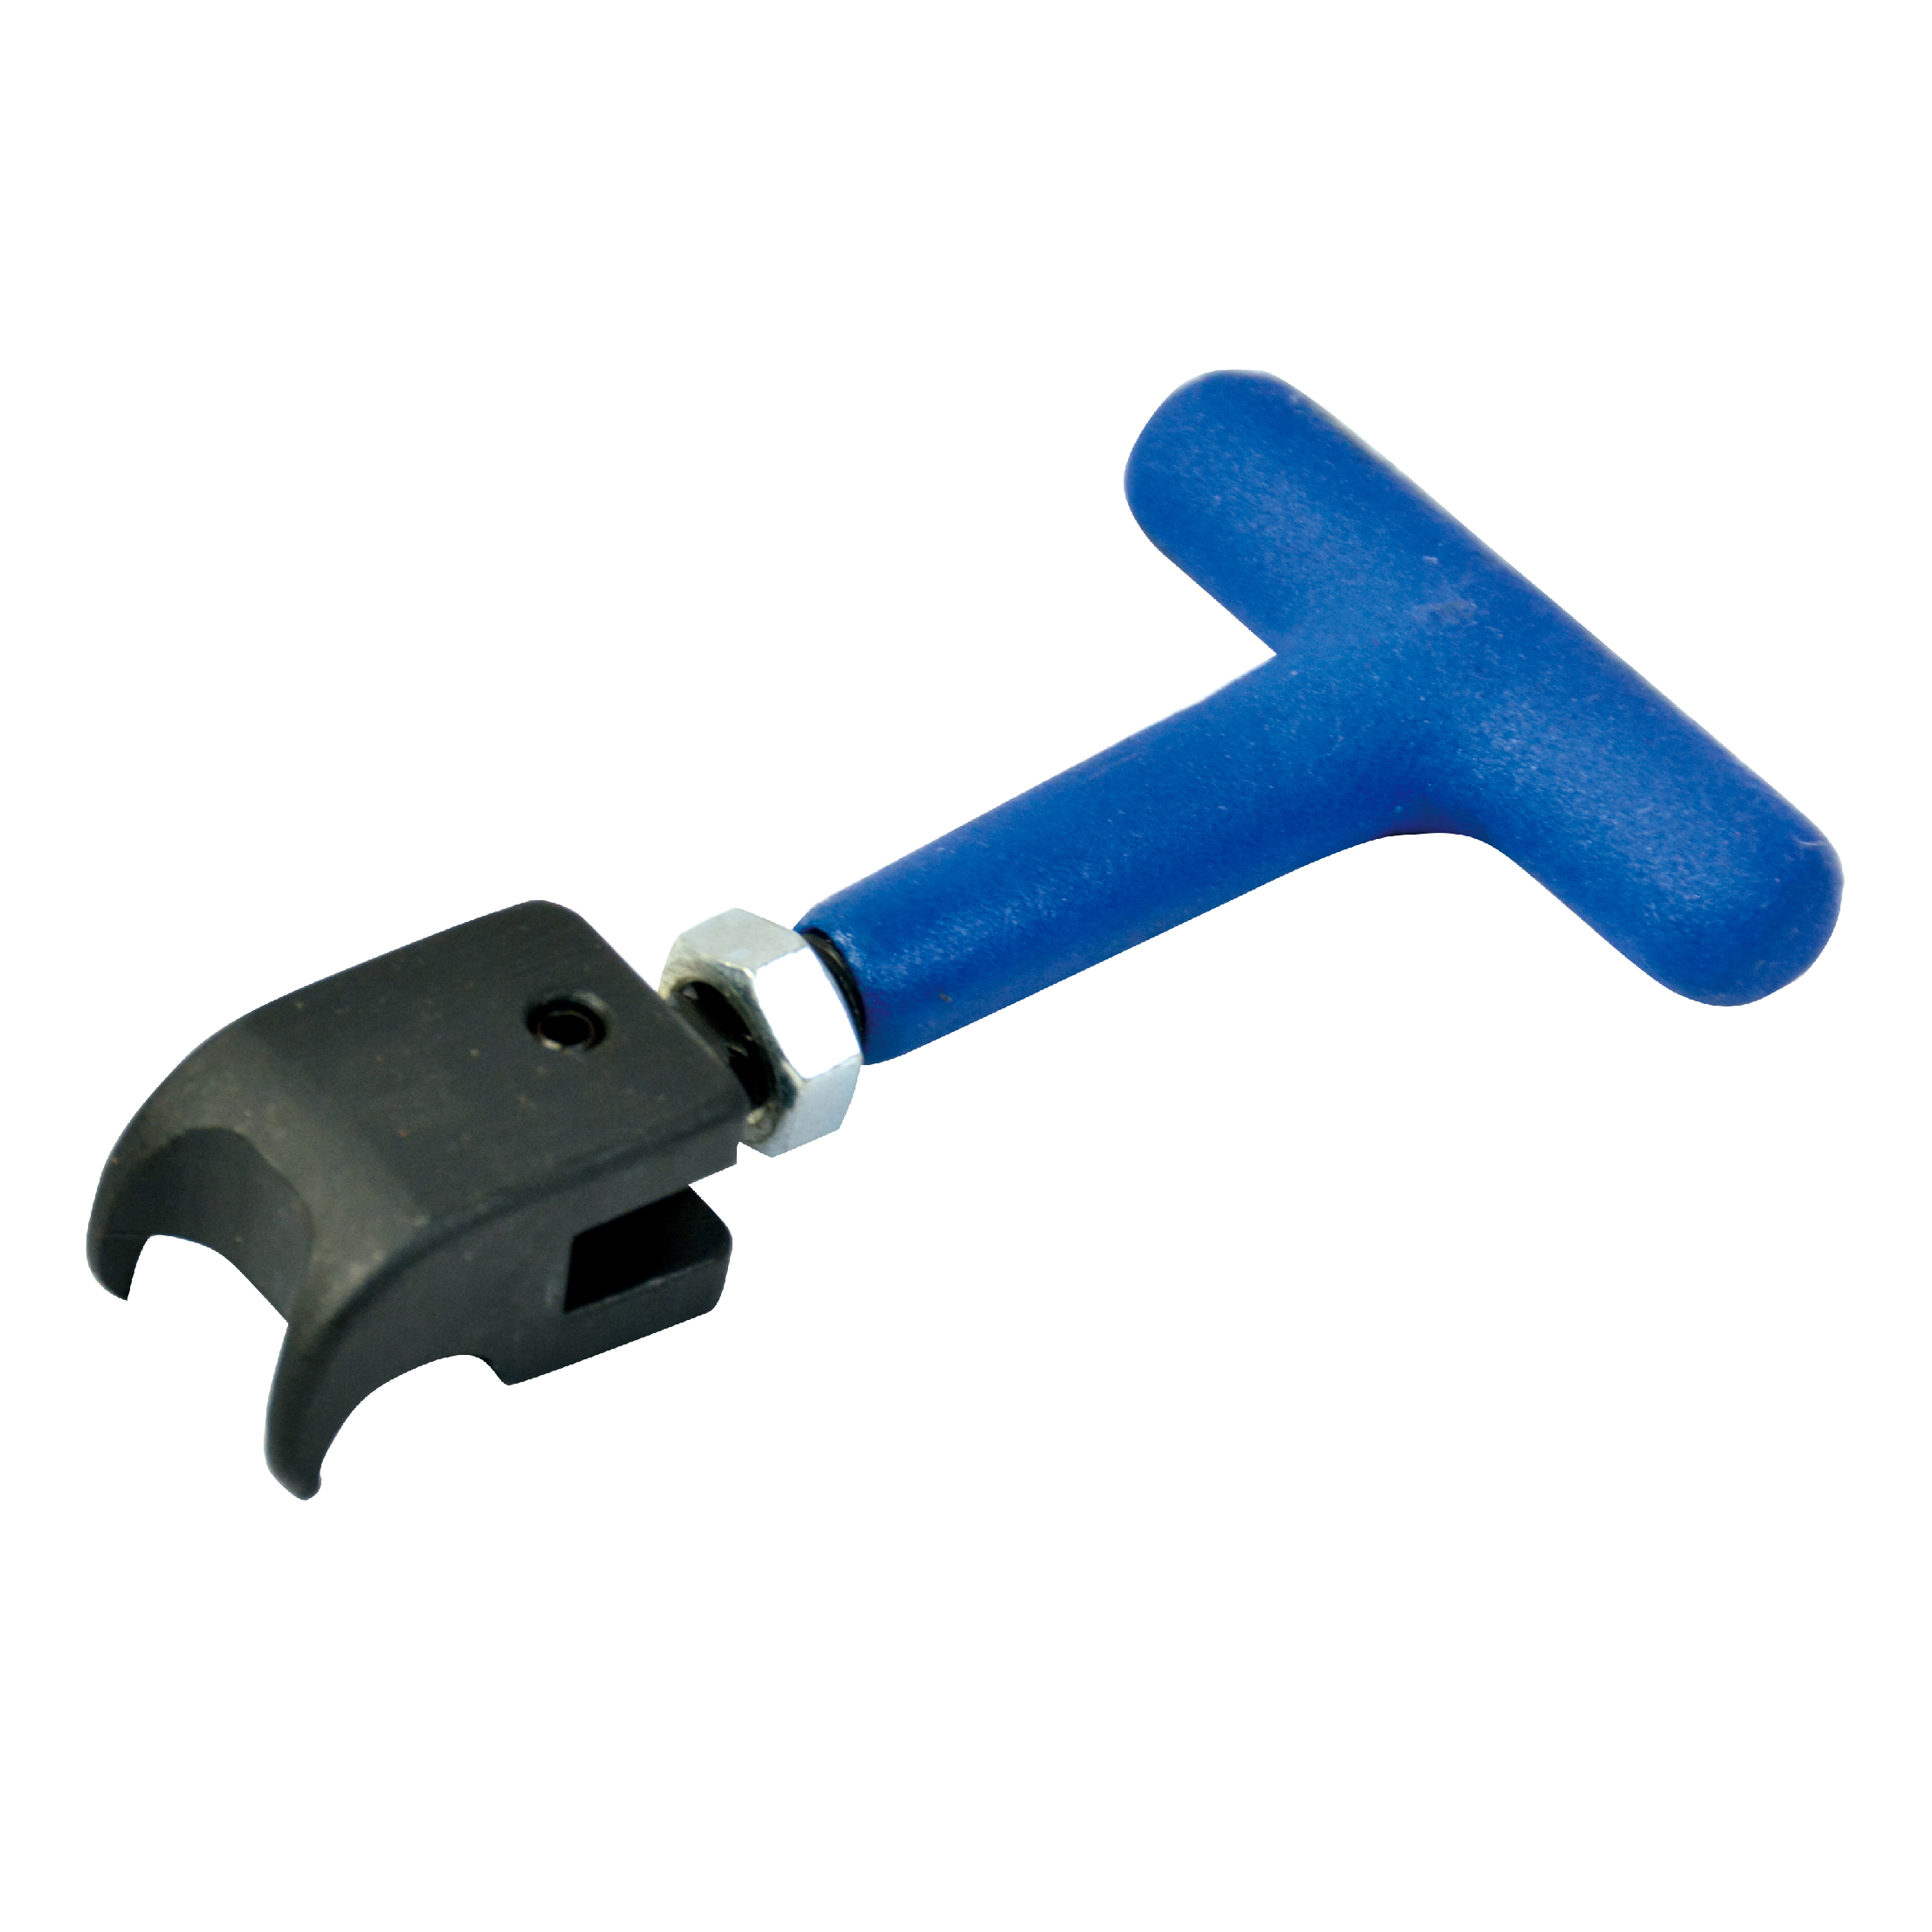 REMOVAL TOOL FOR HENN® CLAMPS TOOL